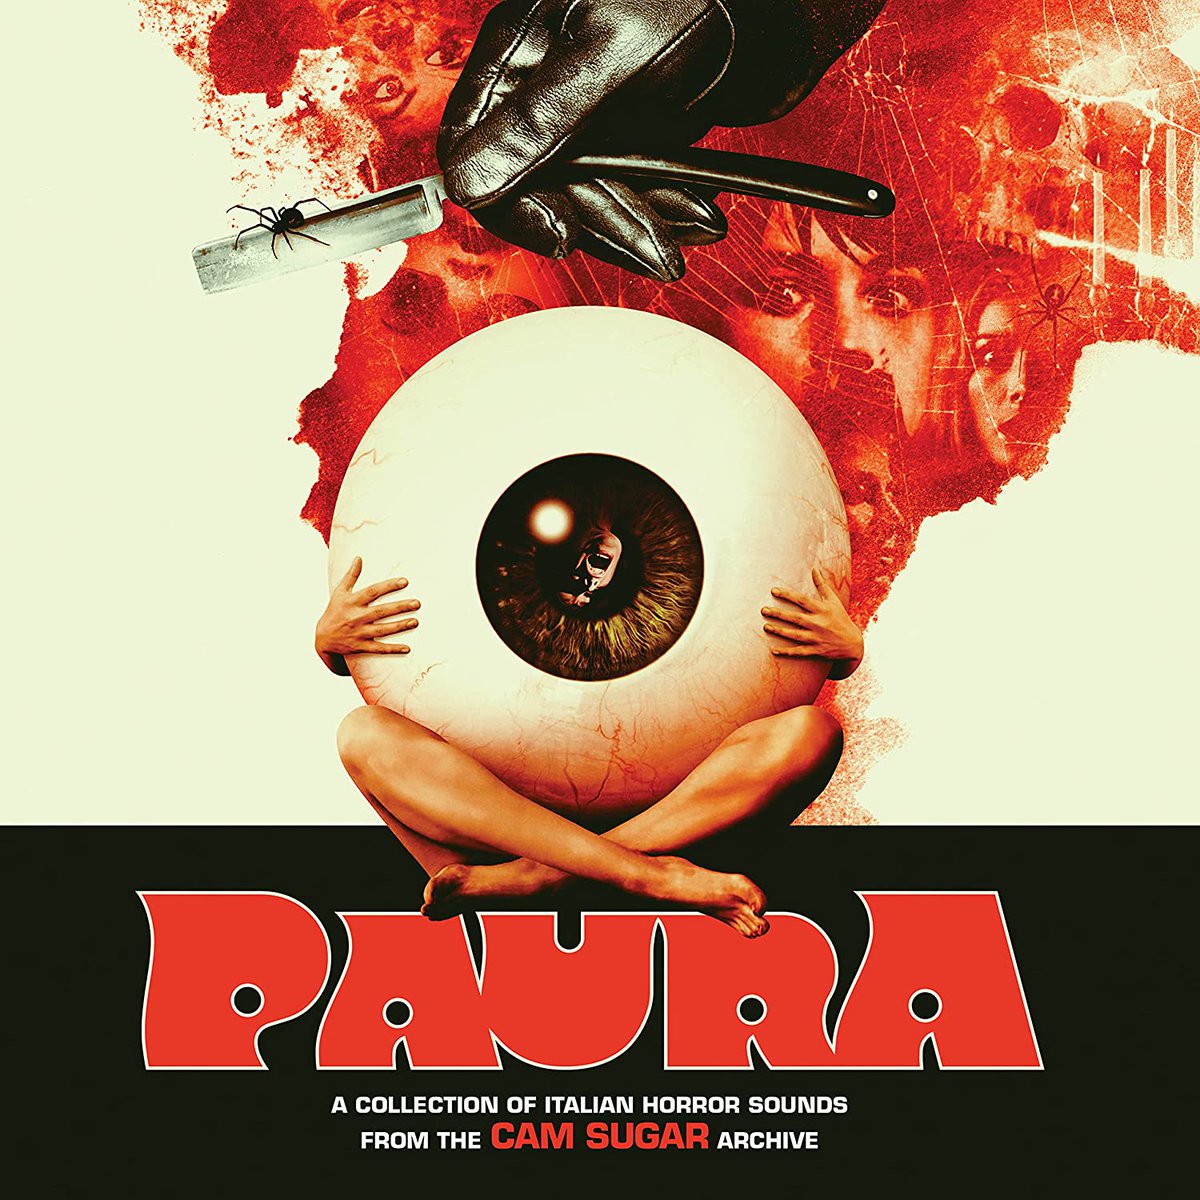 Various – Paura (A Collection Of Italian Horror Sounds From The Cam Sugar Archive) #sunnyboy66 #italian #italianmusic #italiansoundtrack #italianmovie #italianmovies #italianfilm #italianfilms #horrormovie #70sitalian #70sitalianmusic sunnyboy66.com/various-paura-…